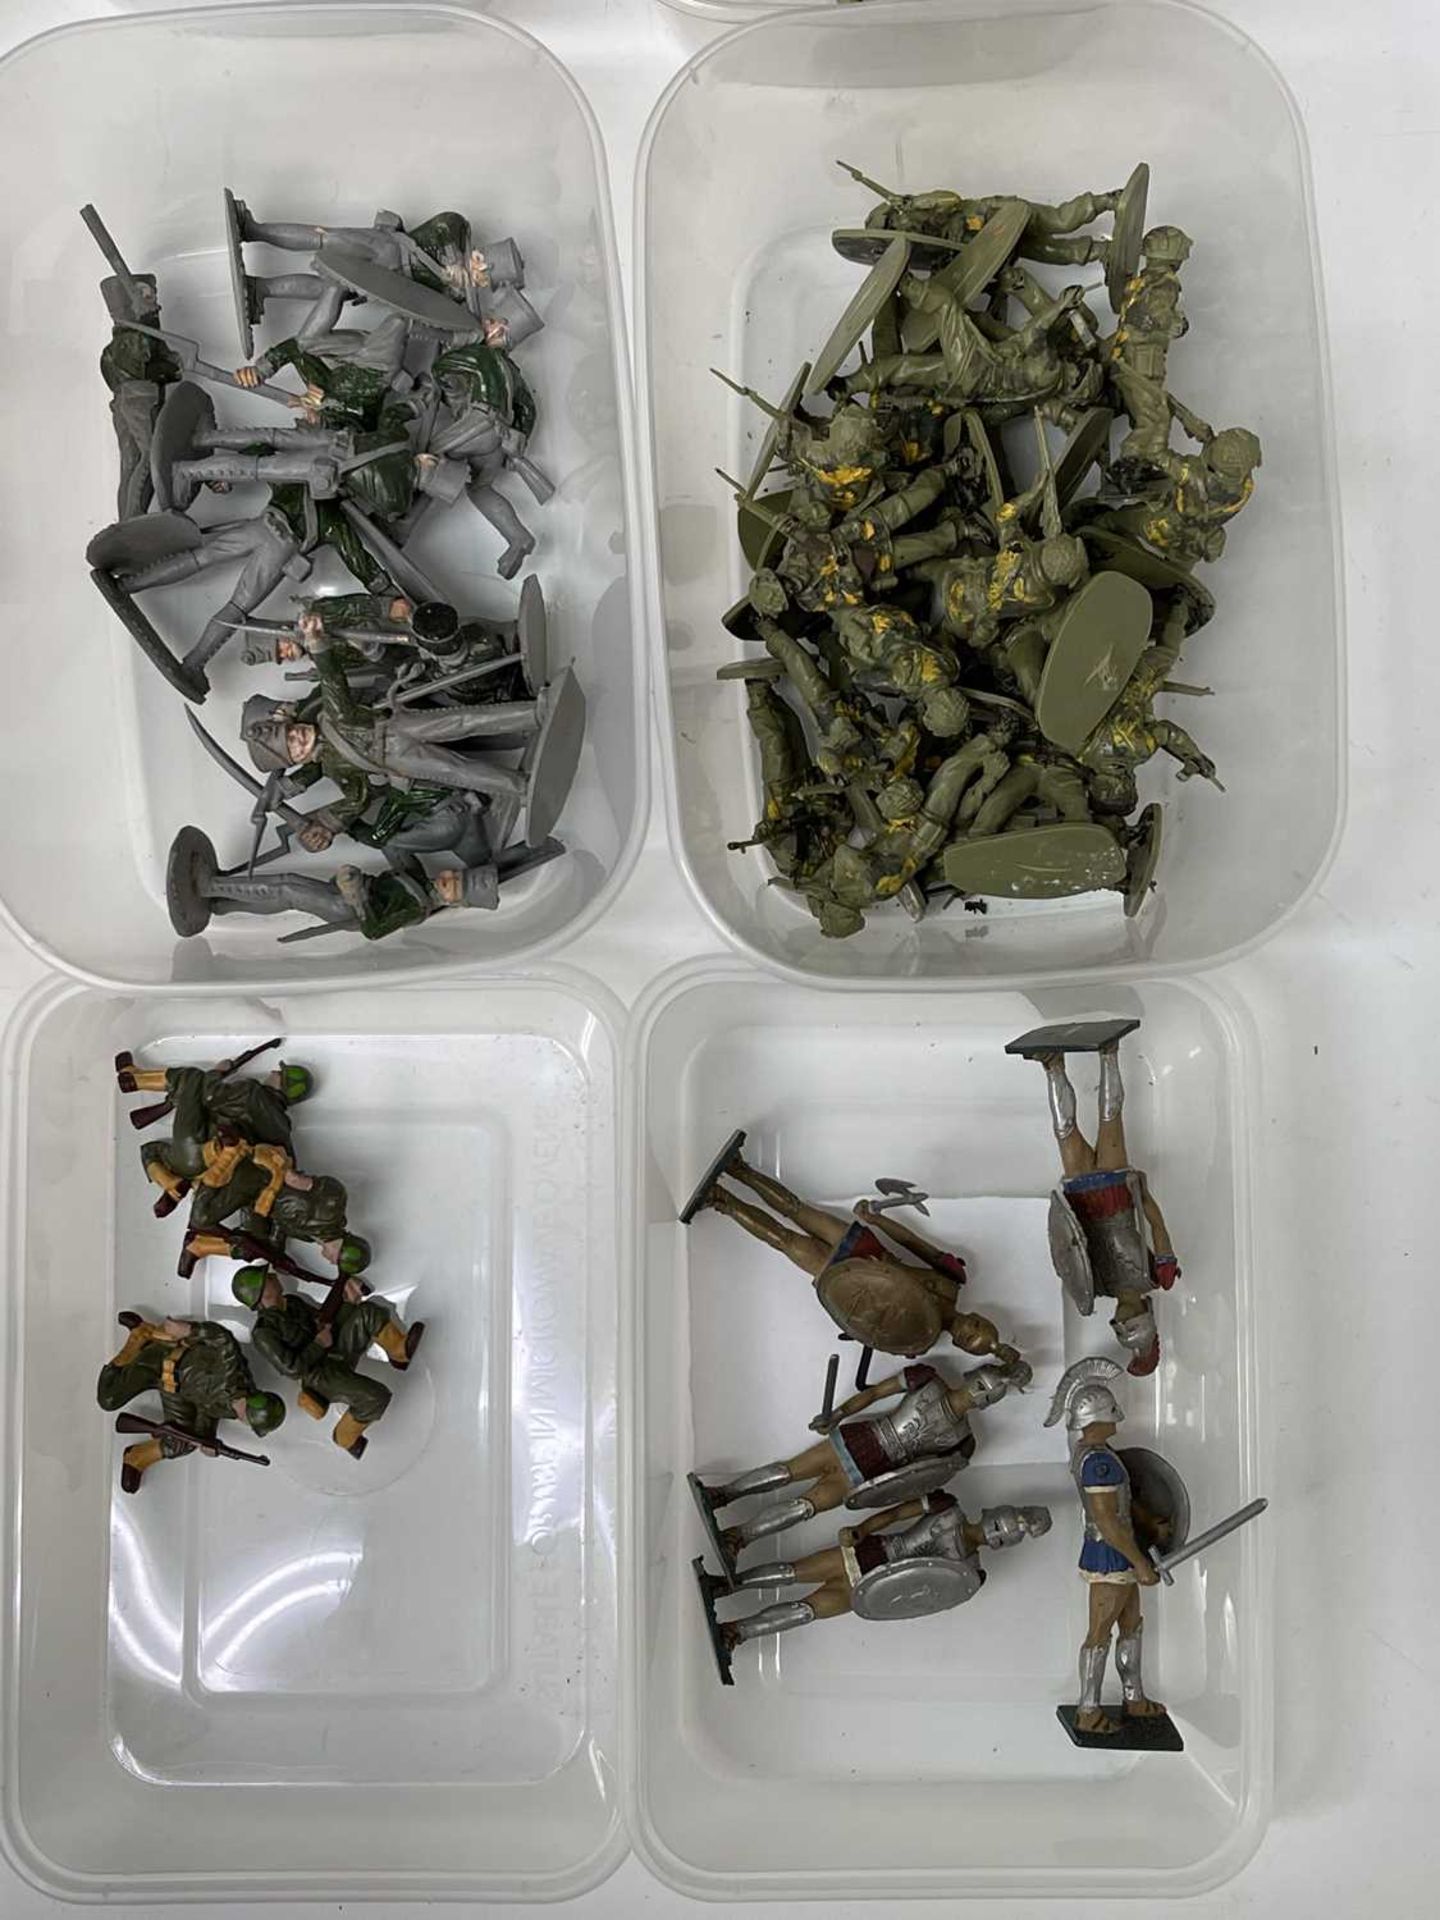 1960s-1980s Plastic Soldiers. Large quantity of mostly Airfix figures sorted into containers - WWII, - Image 4 of 12